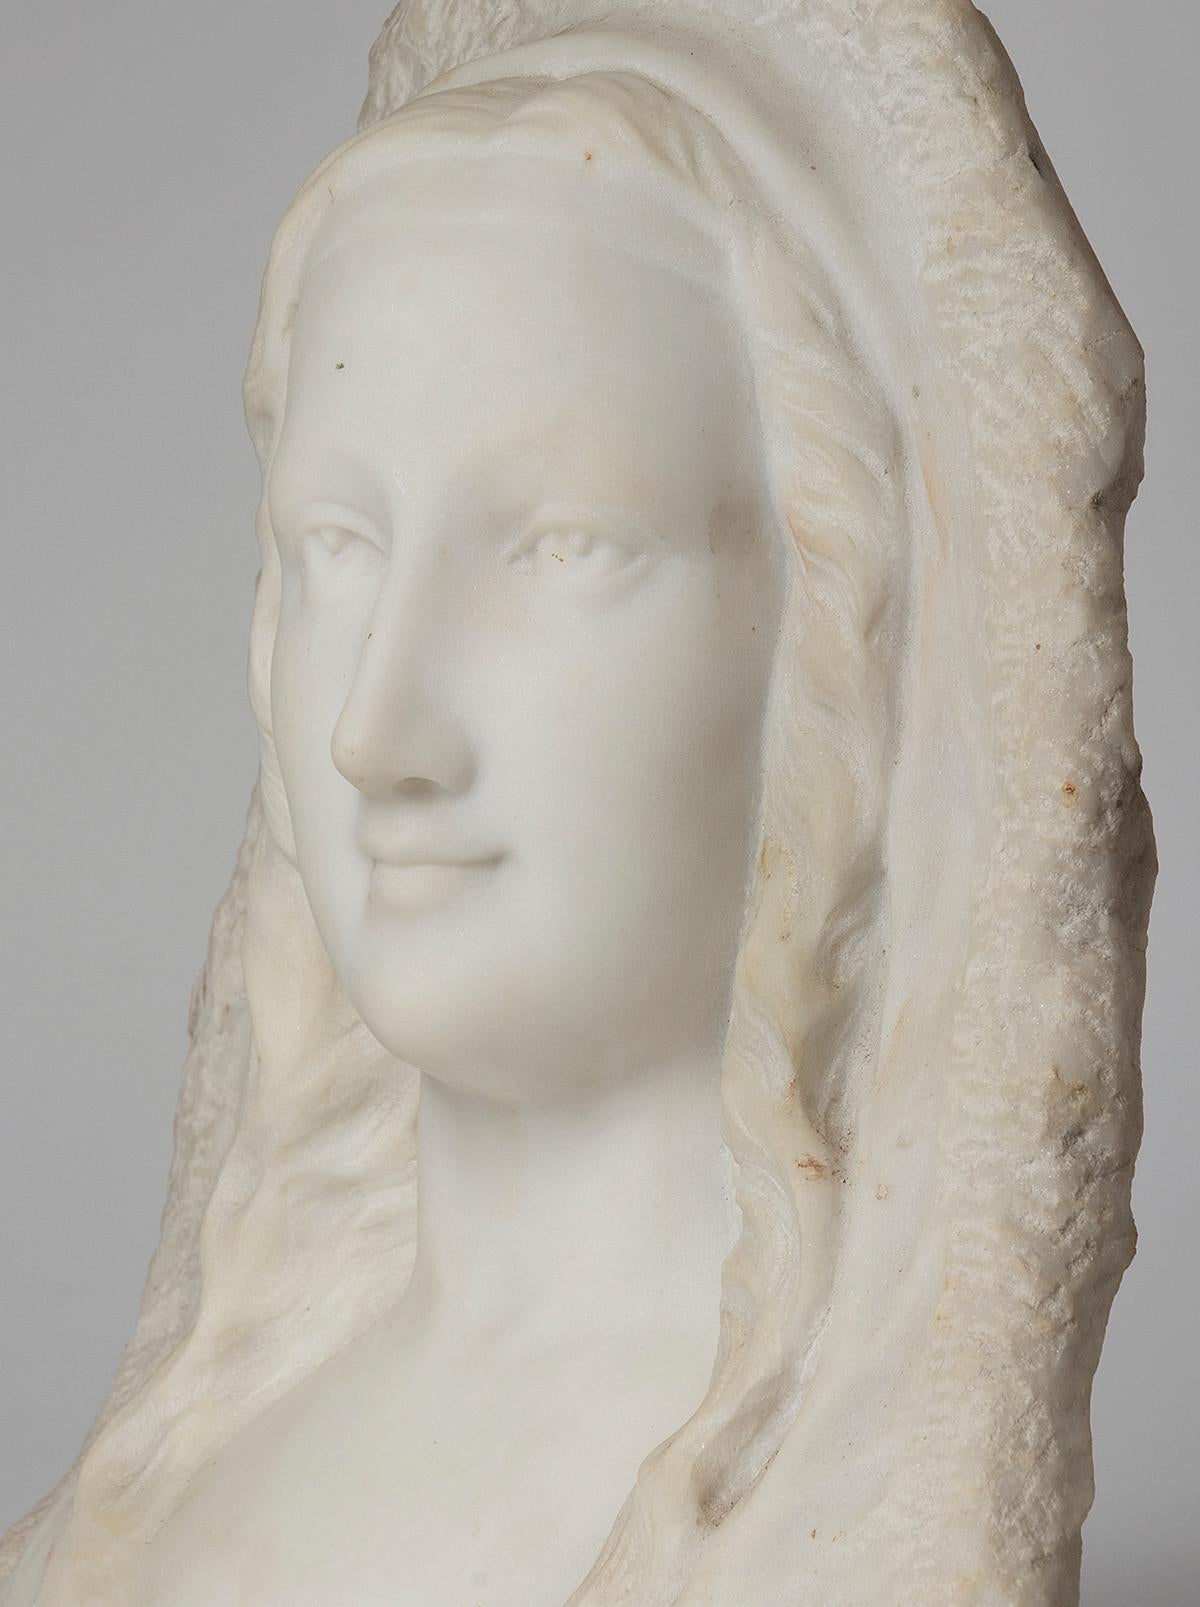 French 19th Century Carrara Marble Sculpture Portrait of Woman, Signed LeBrun For Sale 5